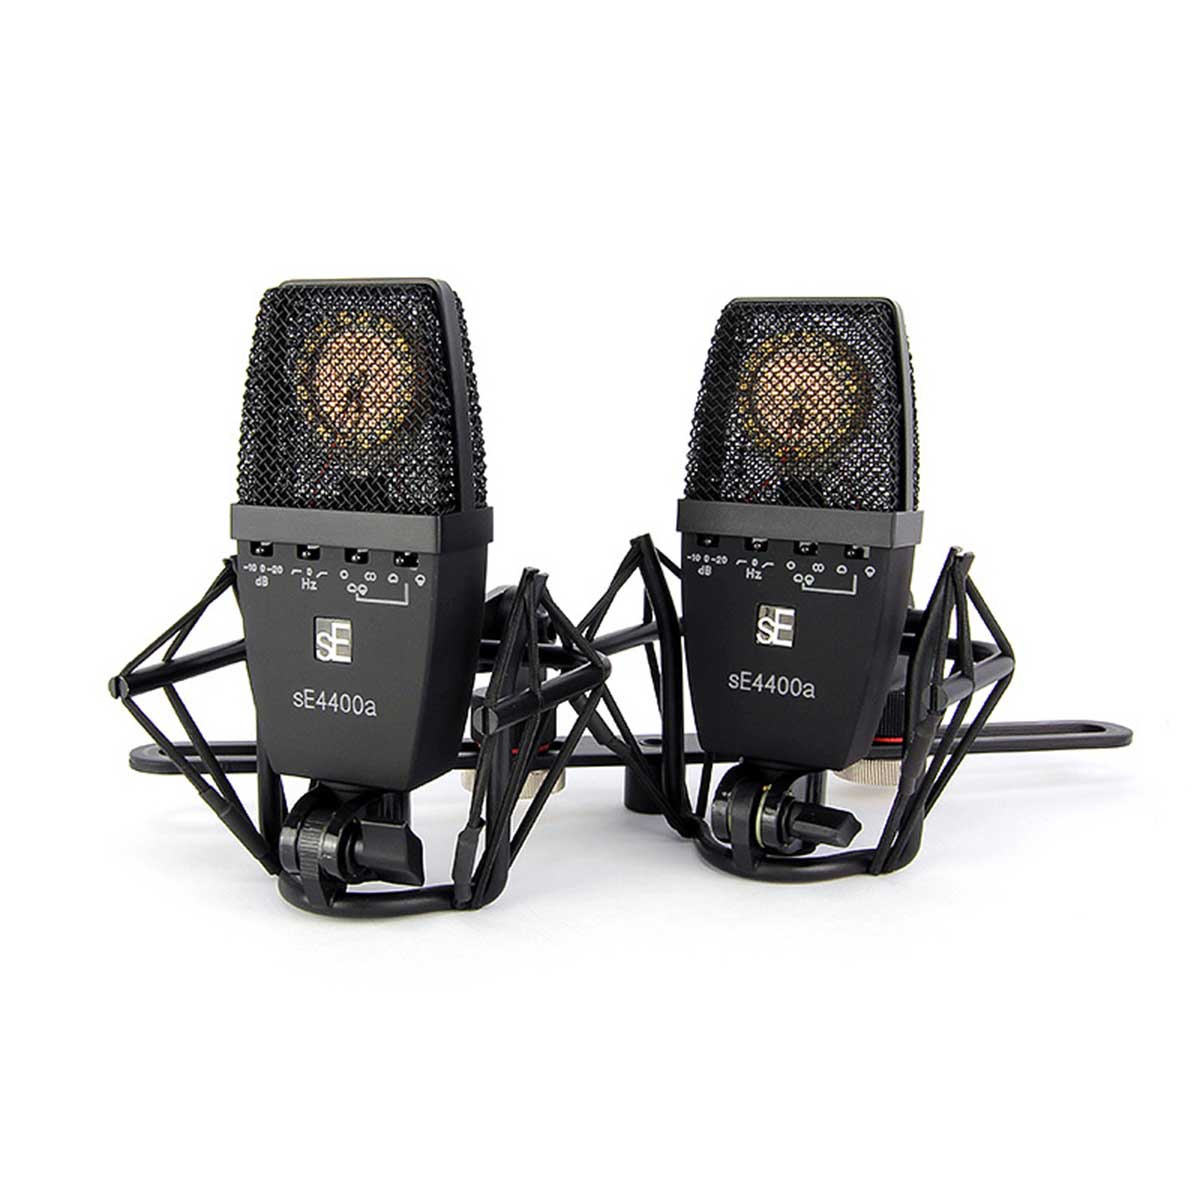 sE Electronics sE4400a Matched Stereo Pair Large-Diaphragm Multi-Pattern Condenser Microphones